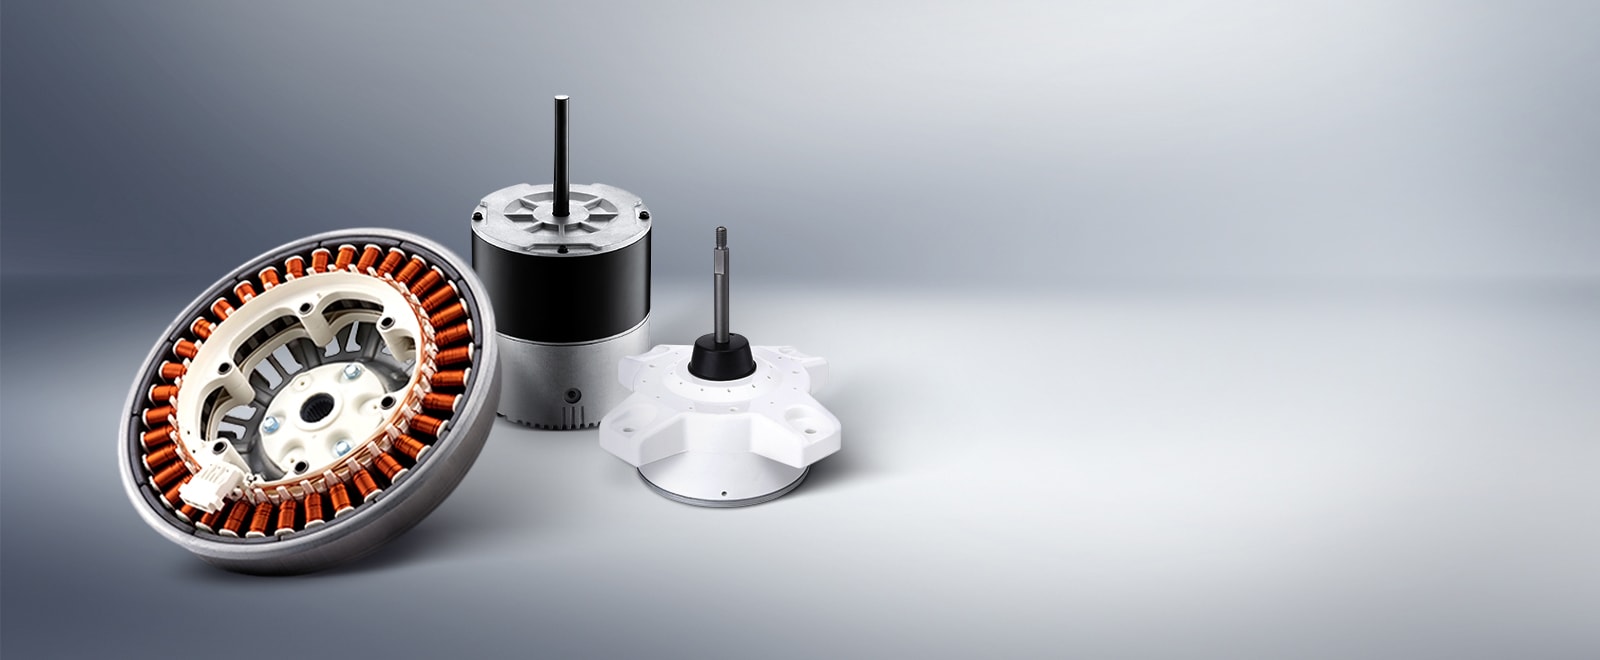 Direct Drive Motor, EC Motor, Fan Motor, and Drone Motor from LG are lined up in a row.